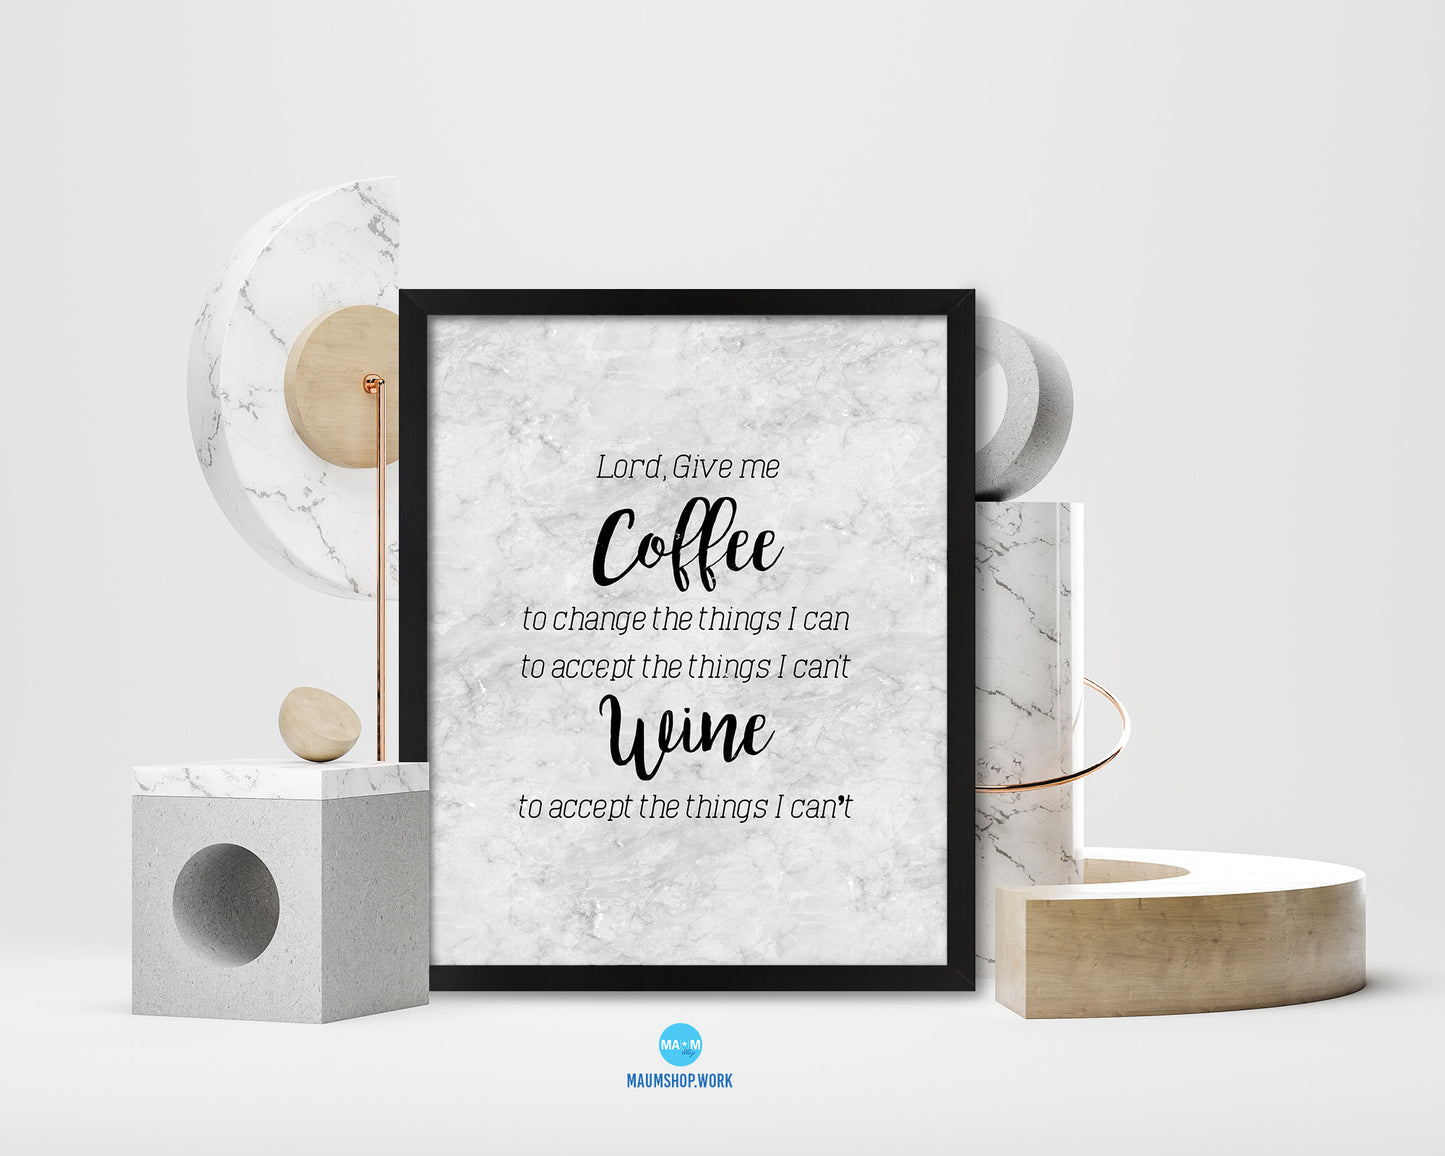 Lord give me coffee to change the things I can Bible Scripture Verse Framed Print Wall Art Decor Gifts